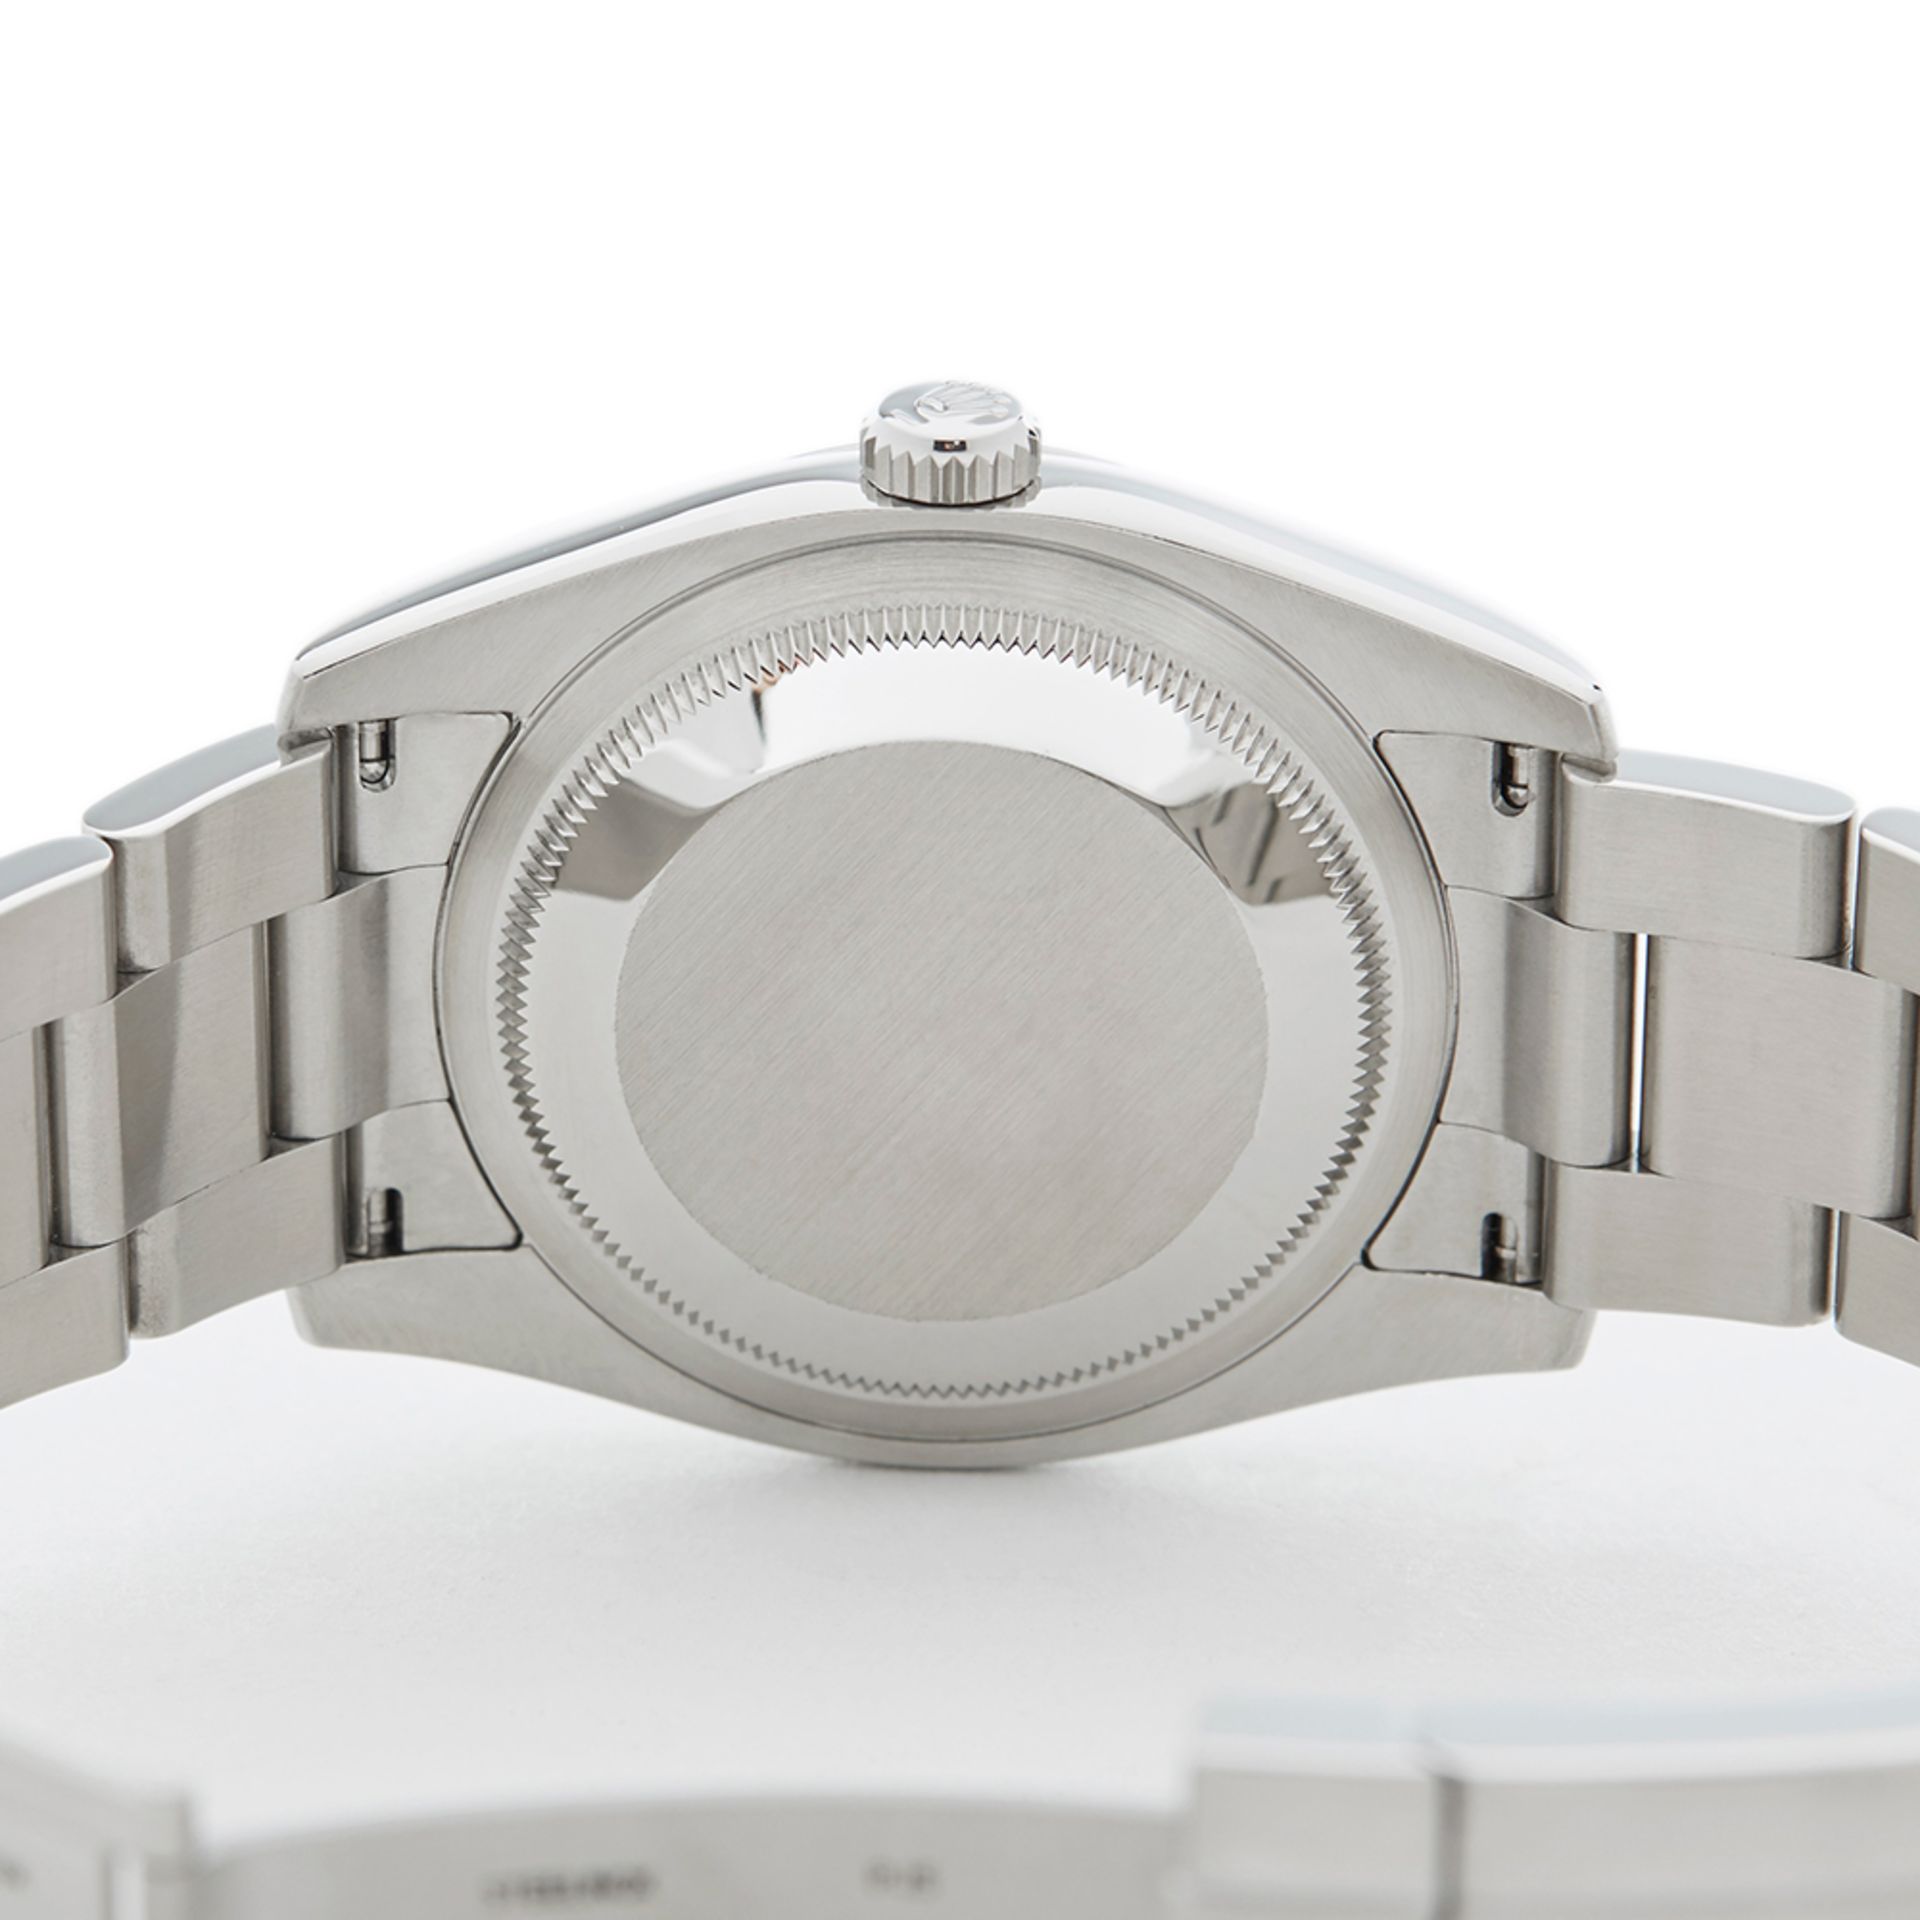 Oyster Perpetual 36mm Stainless Steel 116000 - Image 8 of 9